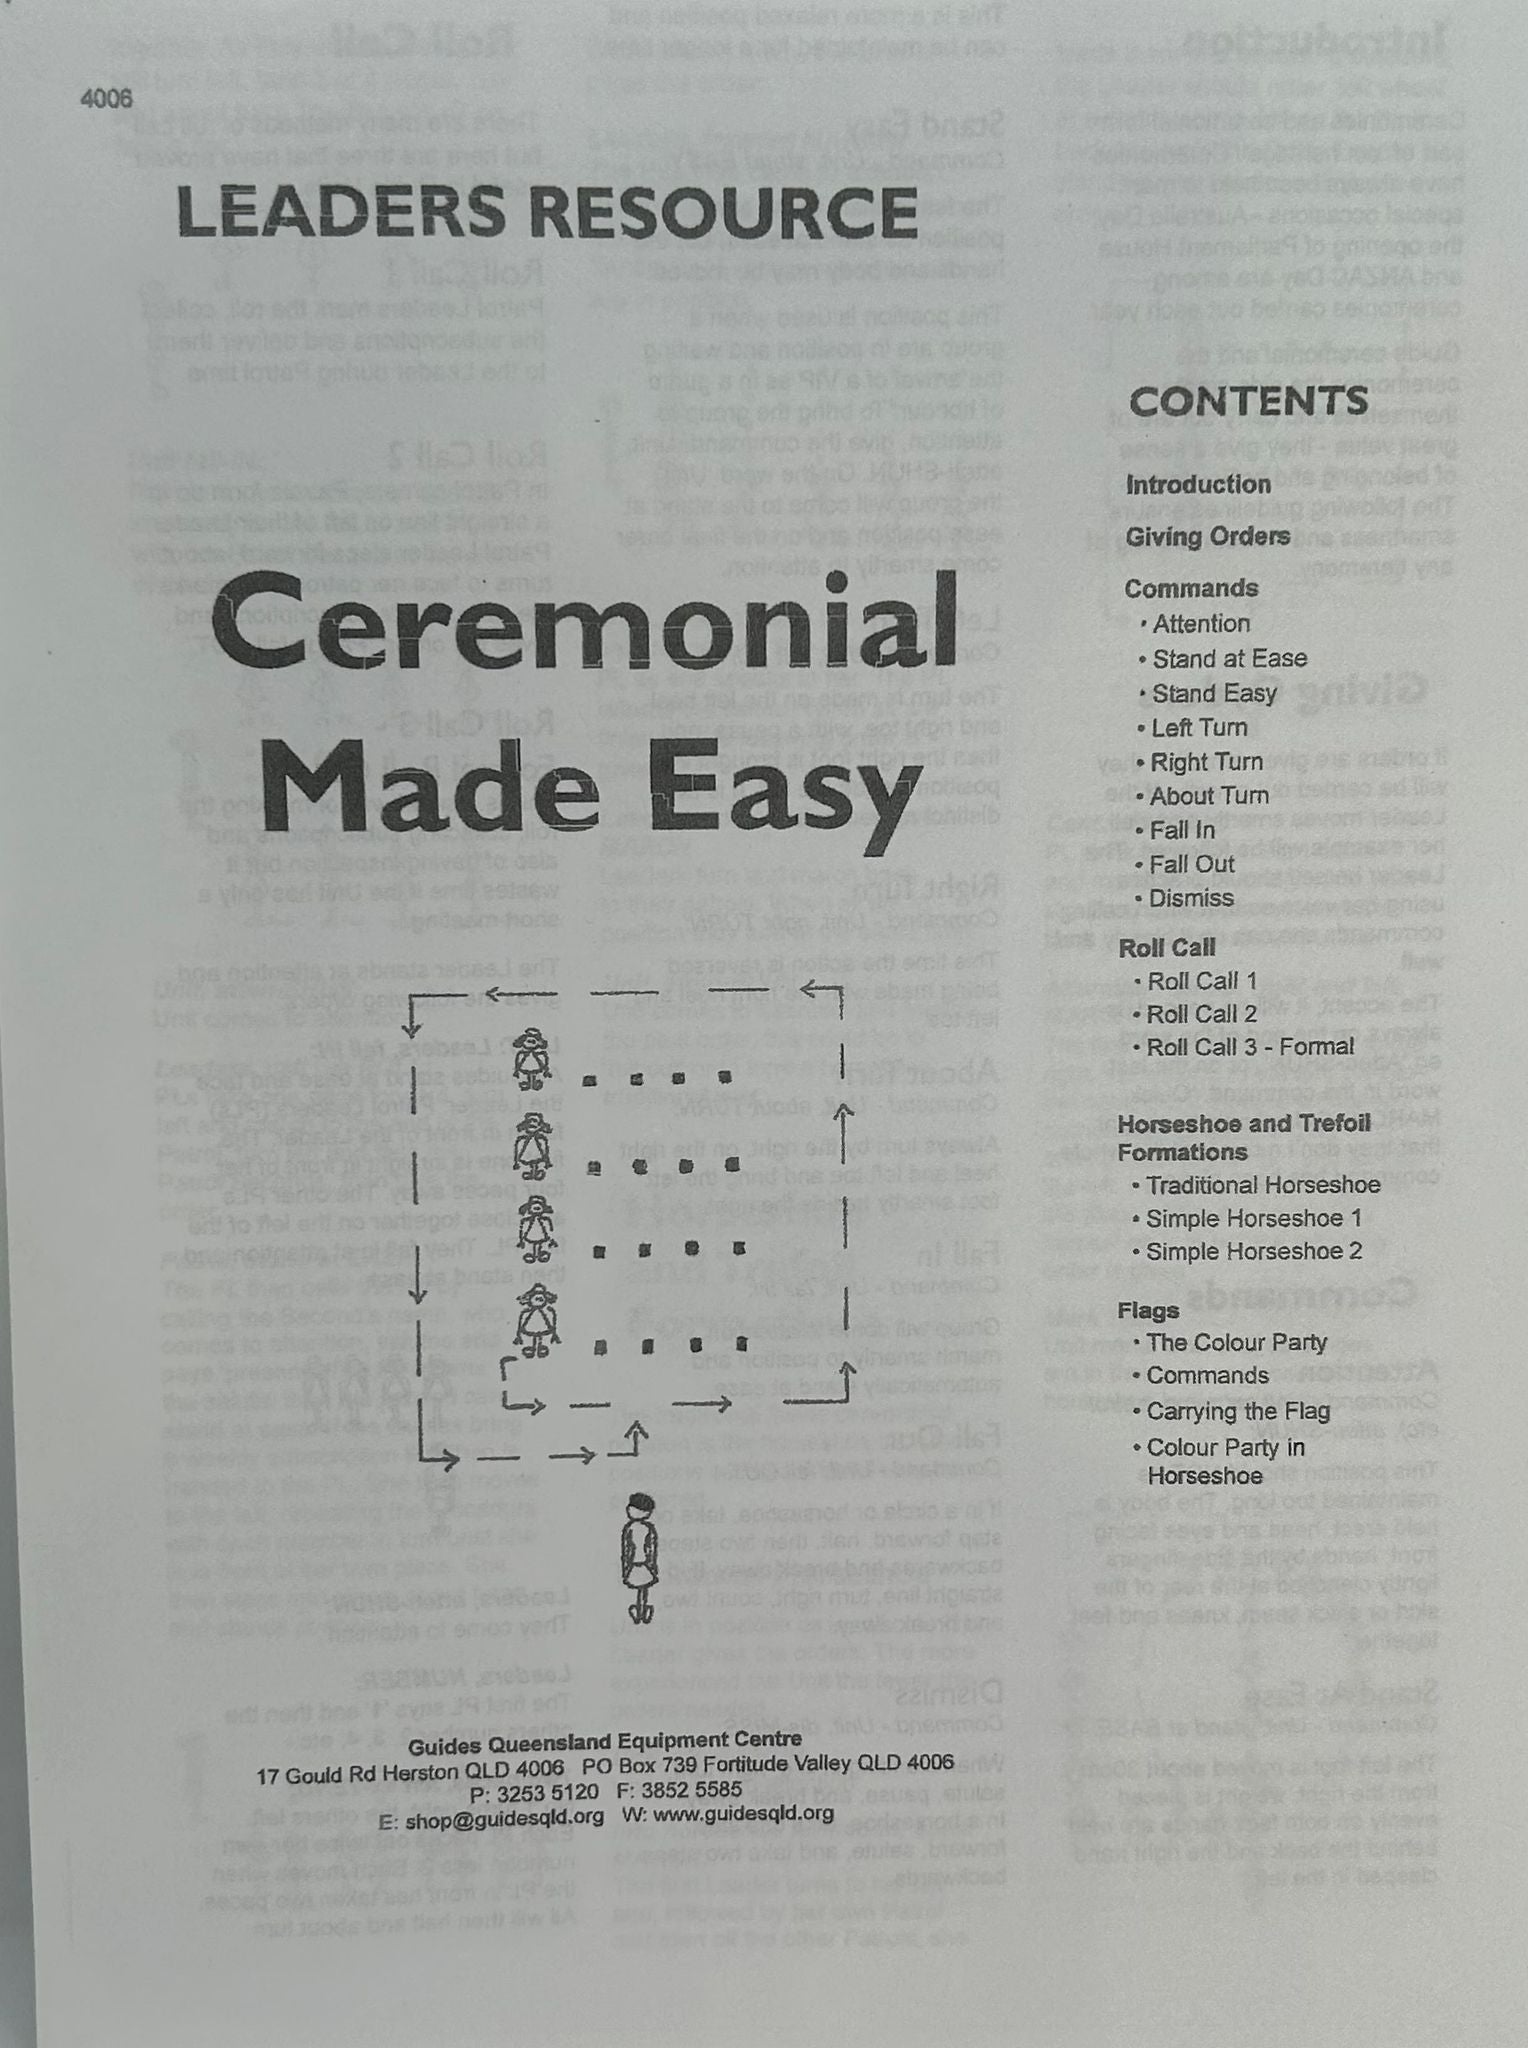 a resource about ceremonies 